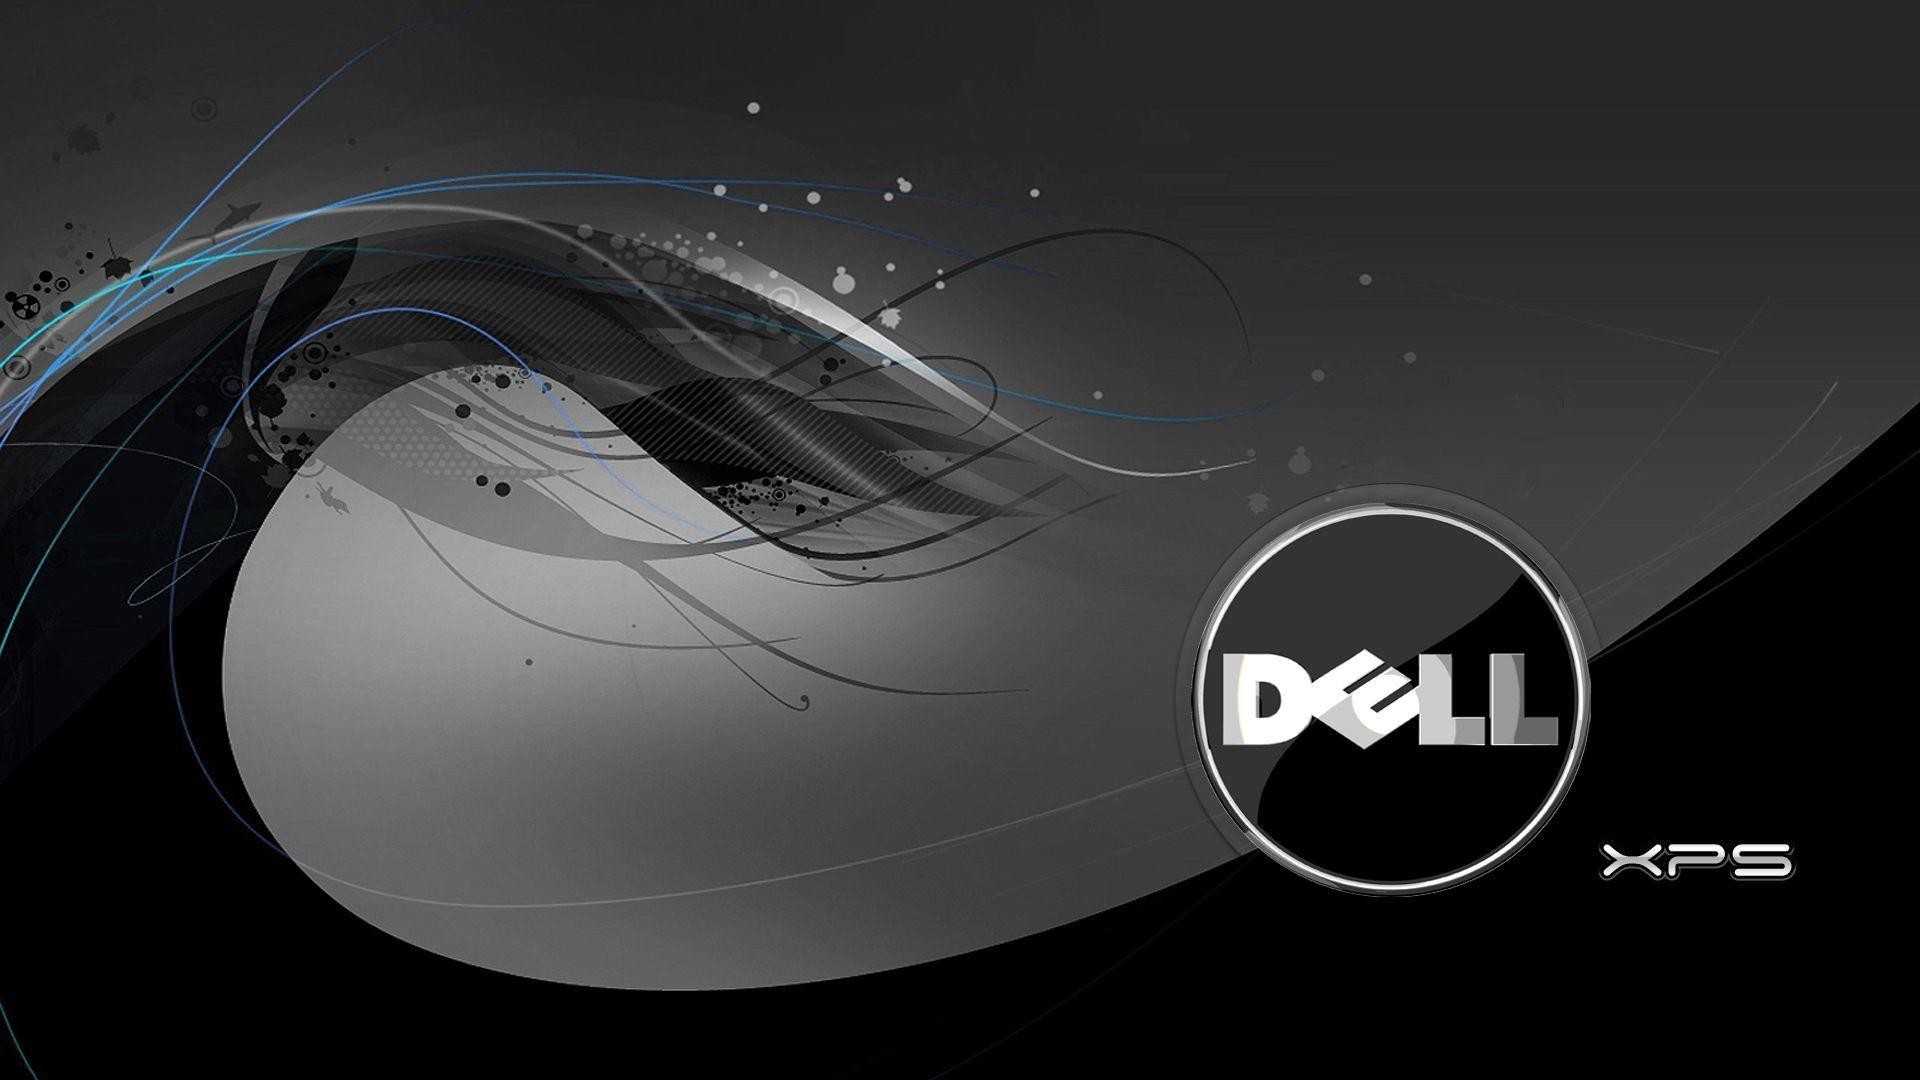 1920x1080 Dell Wallpapers 17750 Images | wallgraf.